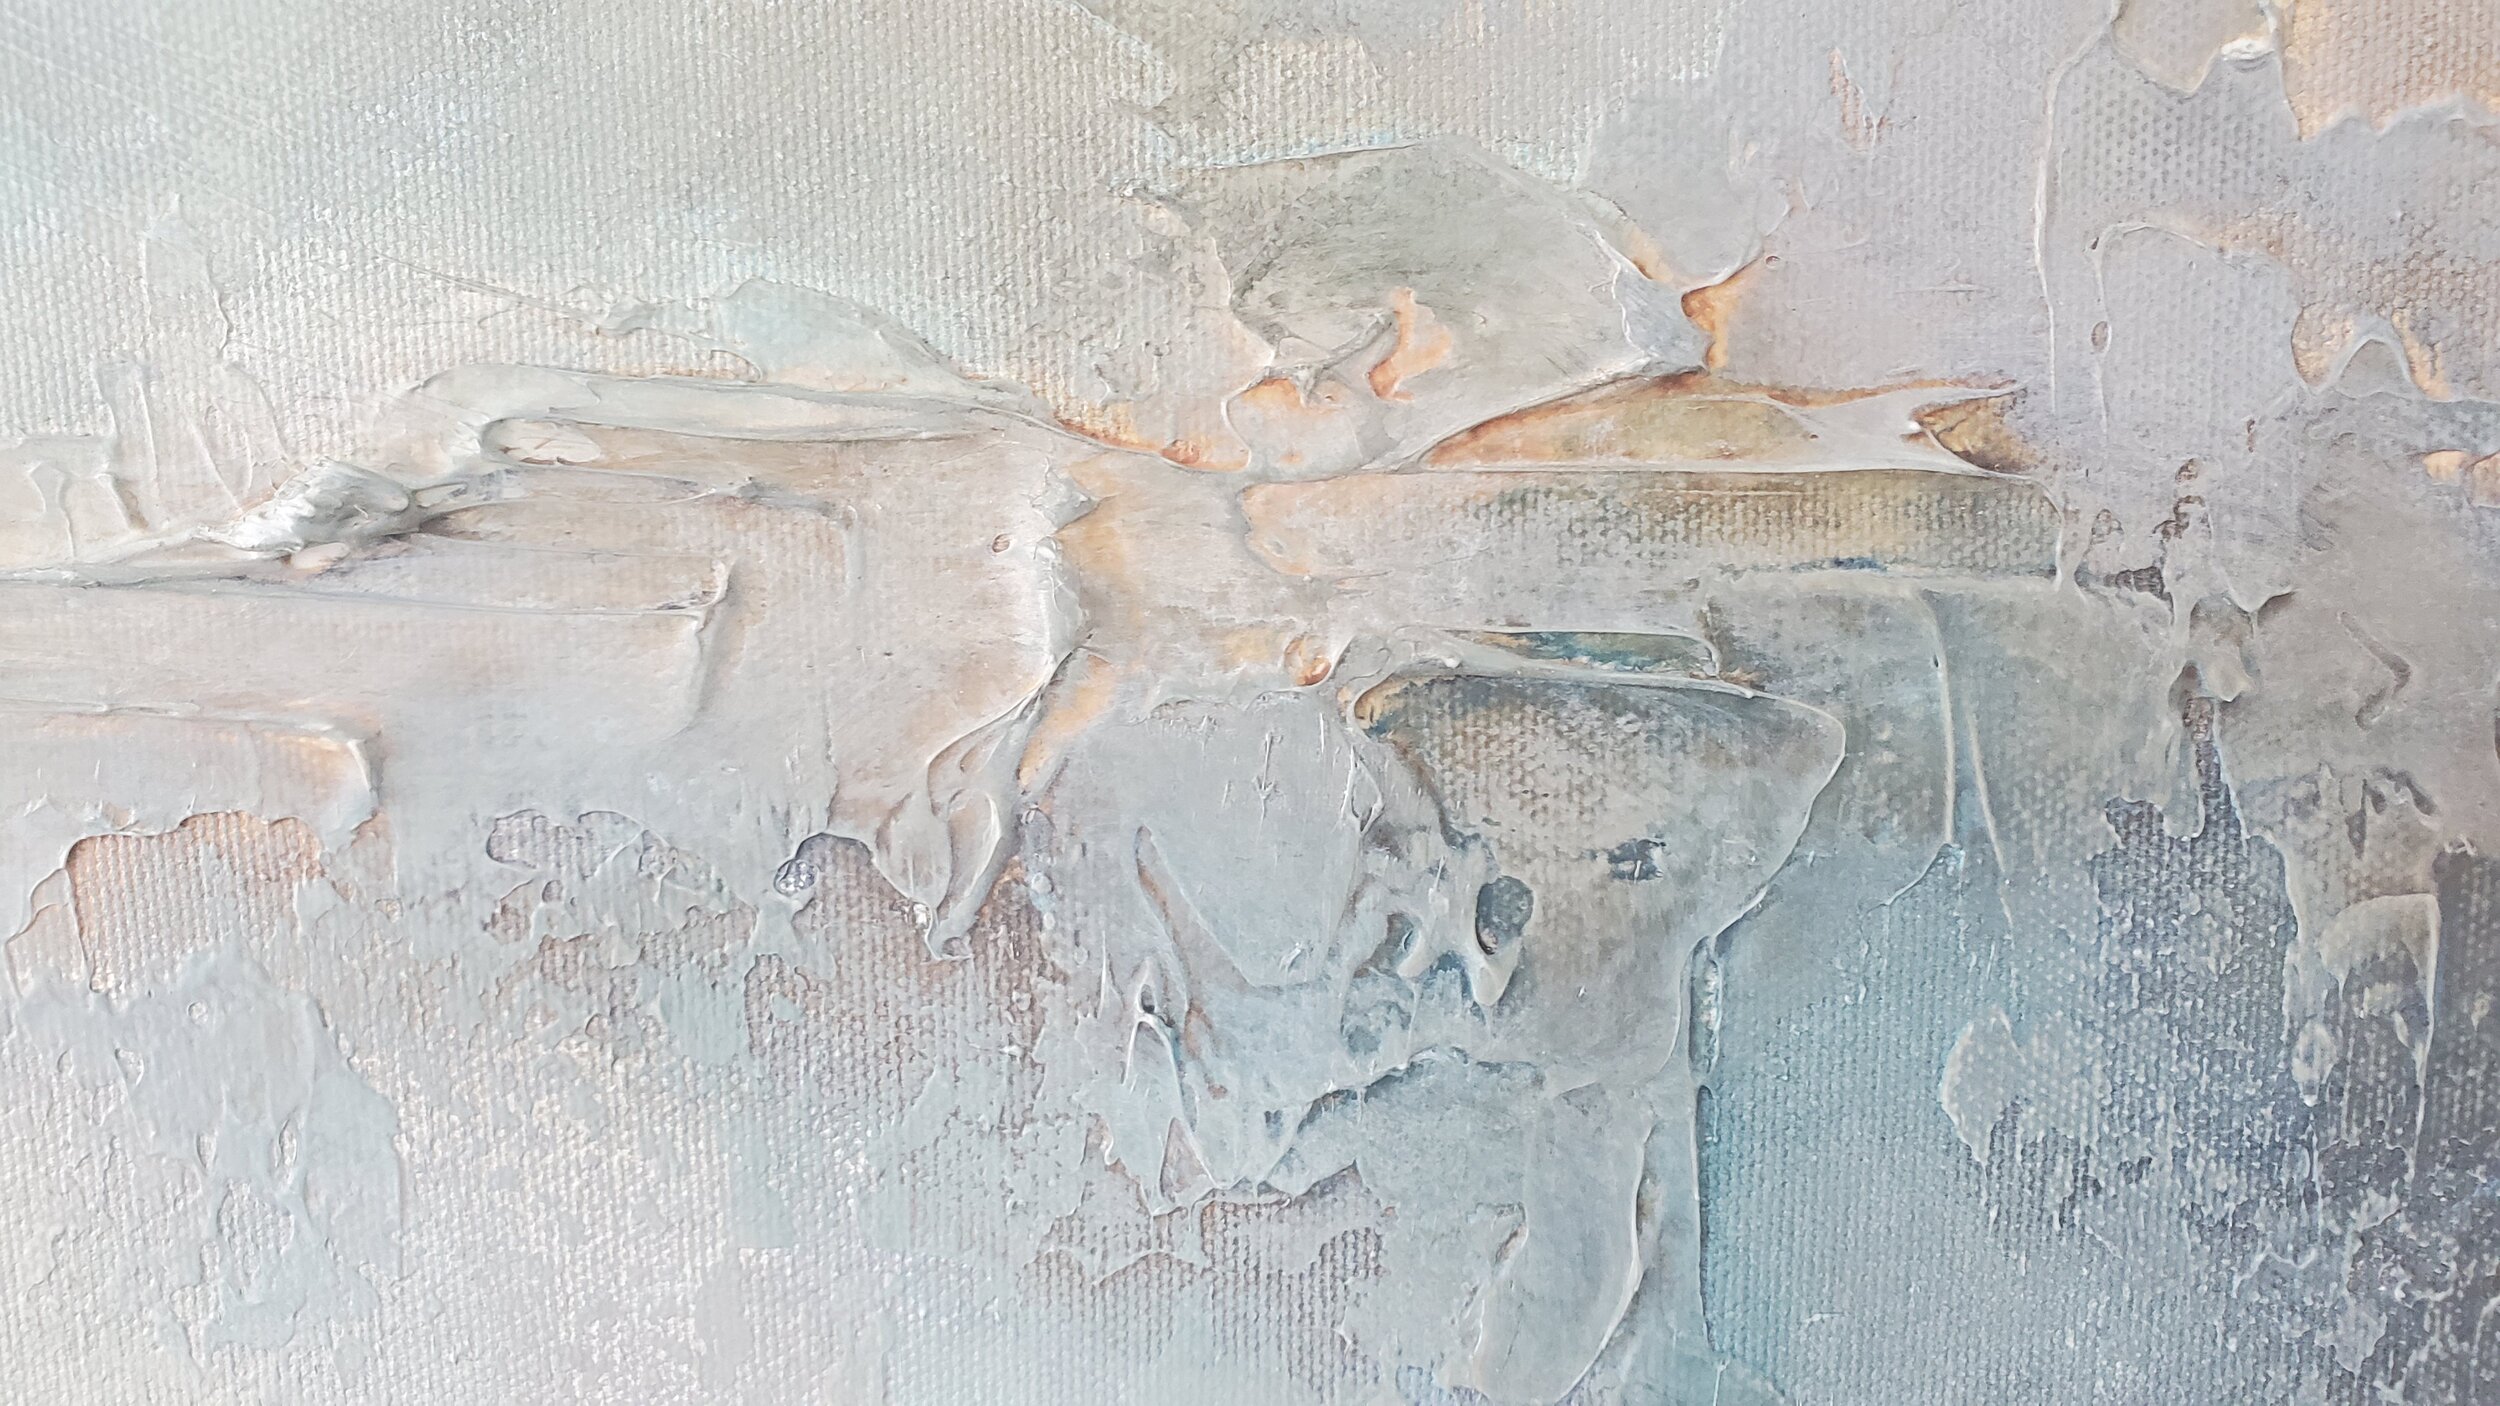  Painting #8 Believe- Vancouver abstract painter, Donna Giraud has eleven new available artworks for sale in her 2020 solo art exhibition titled, Lost and Found. Her large scale, abstract, textural artworks are perfect for any interior design aesthet